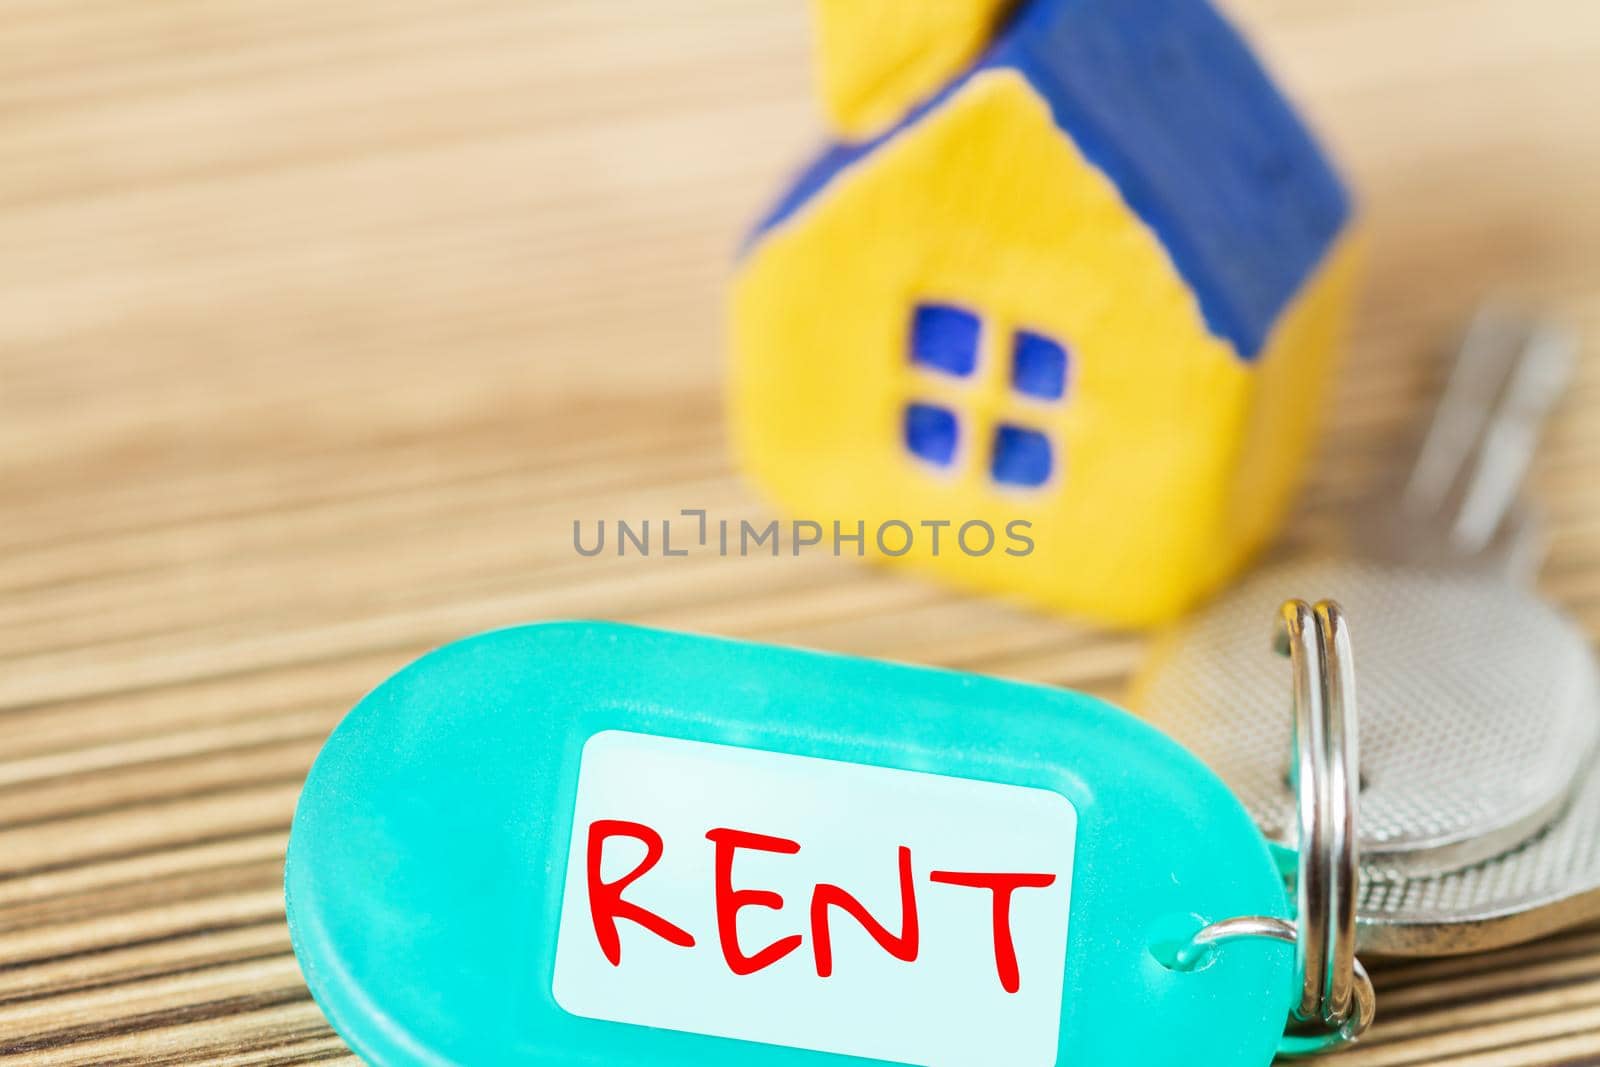 Miniature yellow toy house with keys and inscription RENT on the wooden surface. Property and real estate concept. Selective focus